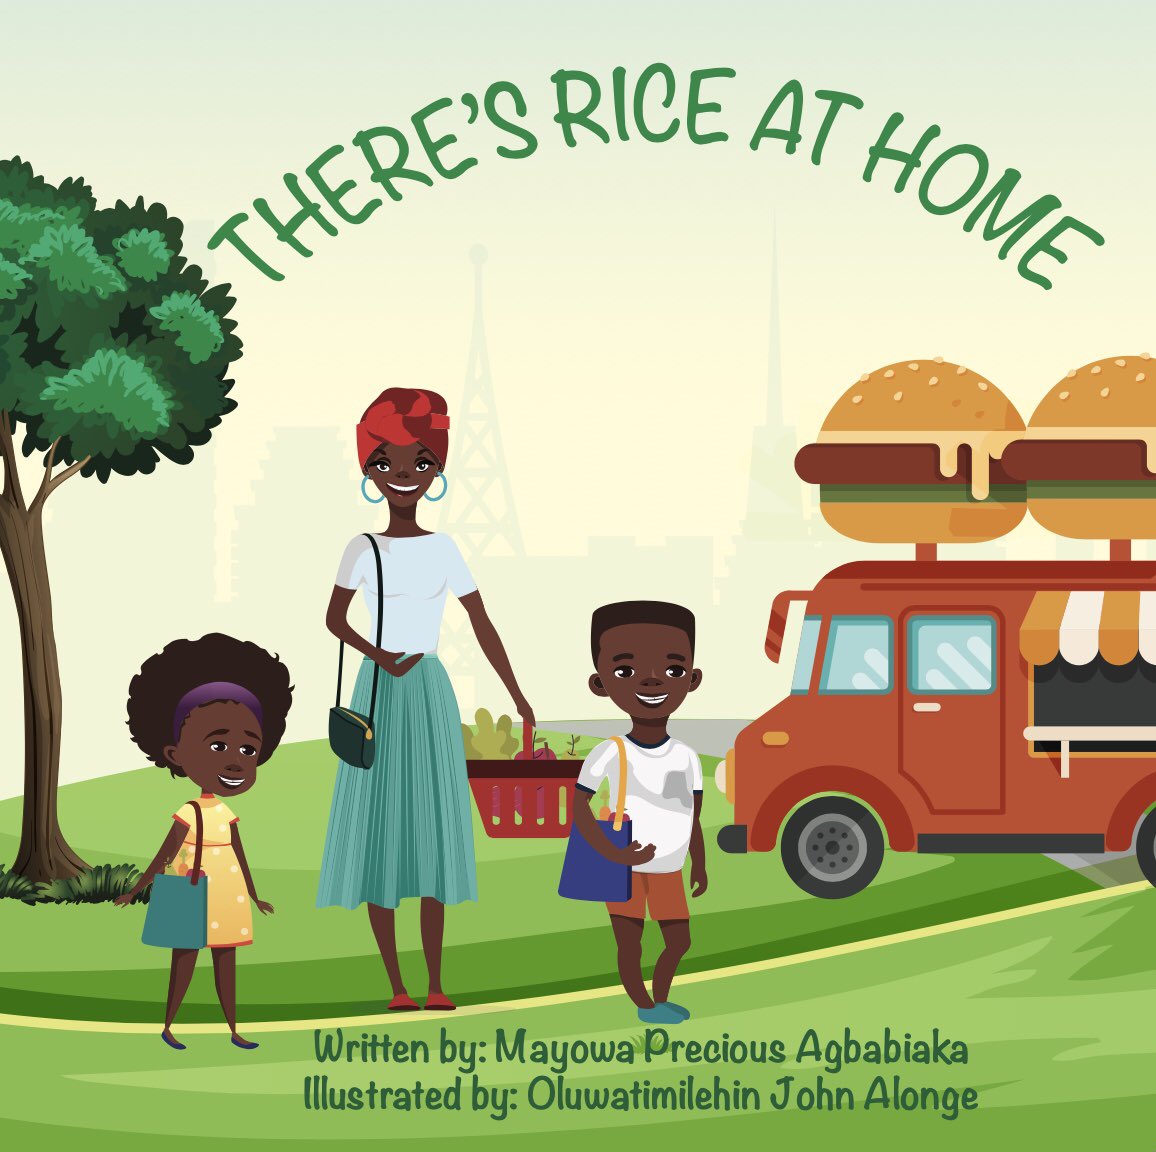 Originally I didn’t want it in English. But  @dbcxptures reminded me that there are still Black children out here who don’t speak or understand their native languages and I would never want to exclude them. It’s their story too!  #TheresRiceAtHome  https://bit.ly/TRAHEnglish 